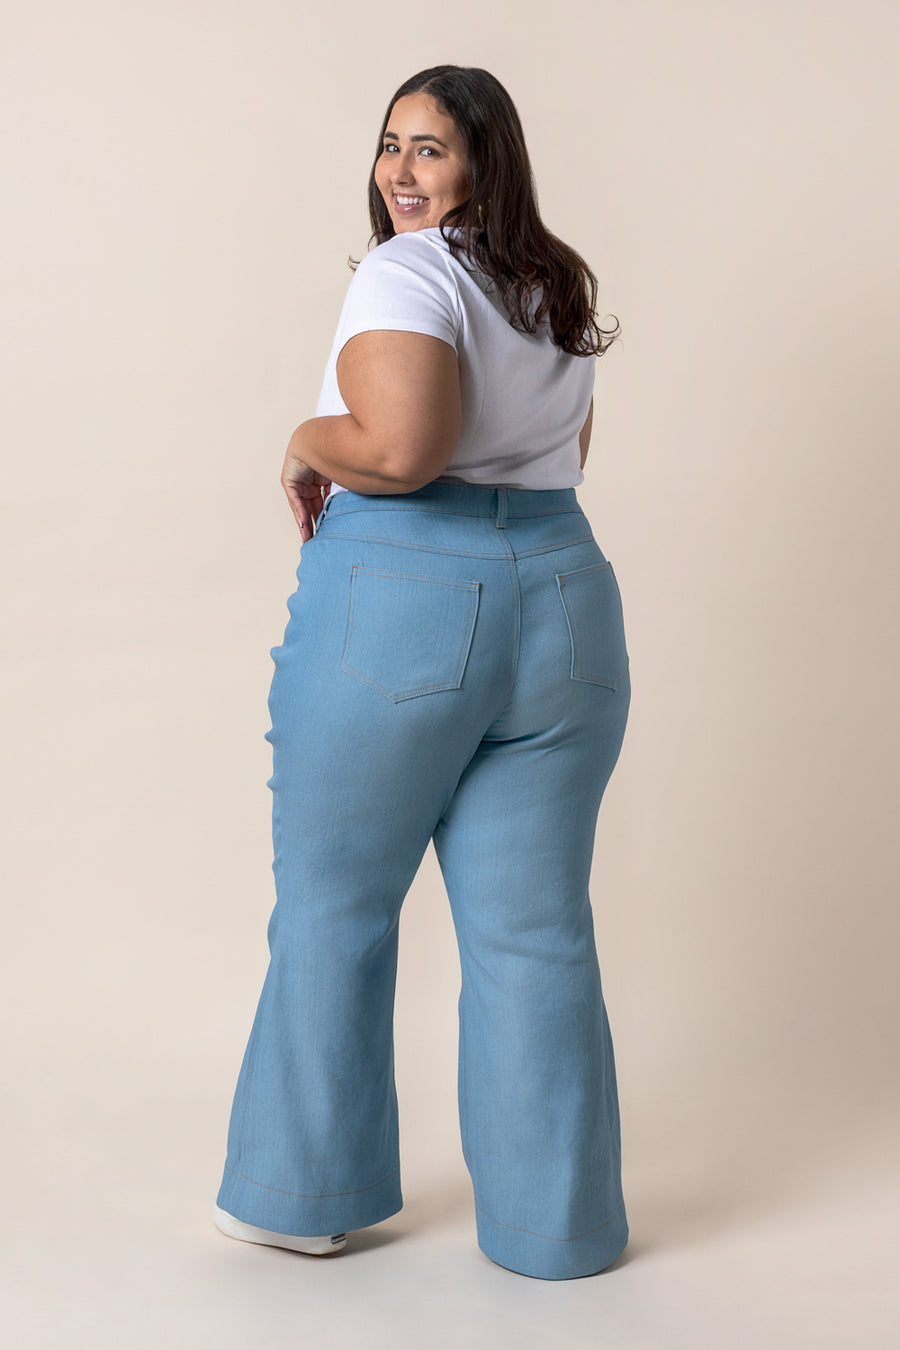 Plus Size m jeans by maurices™ Flare Sleek Pull On High Rise Jean